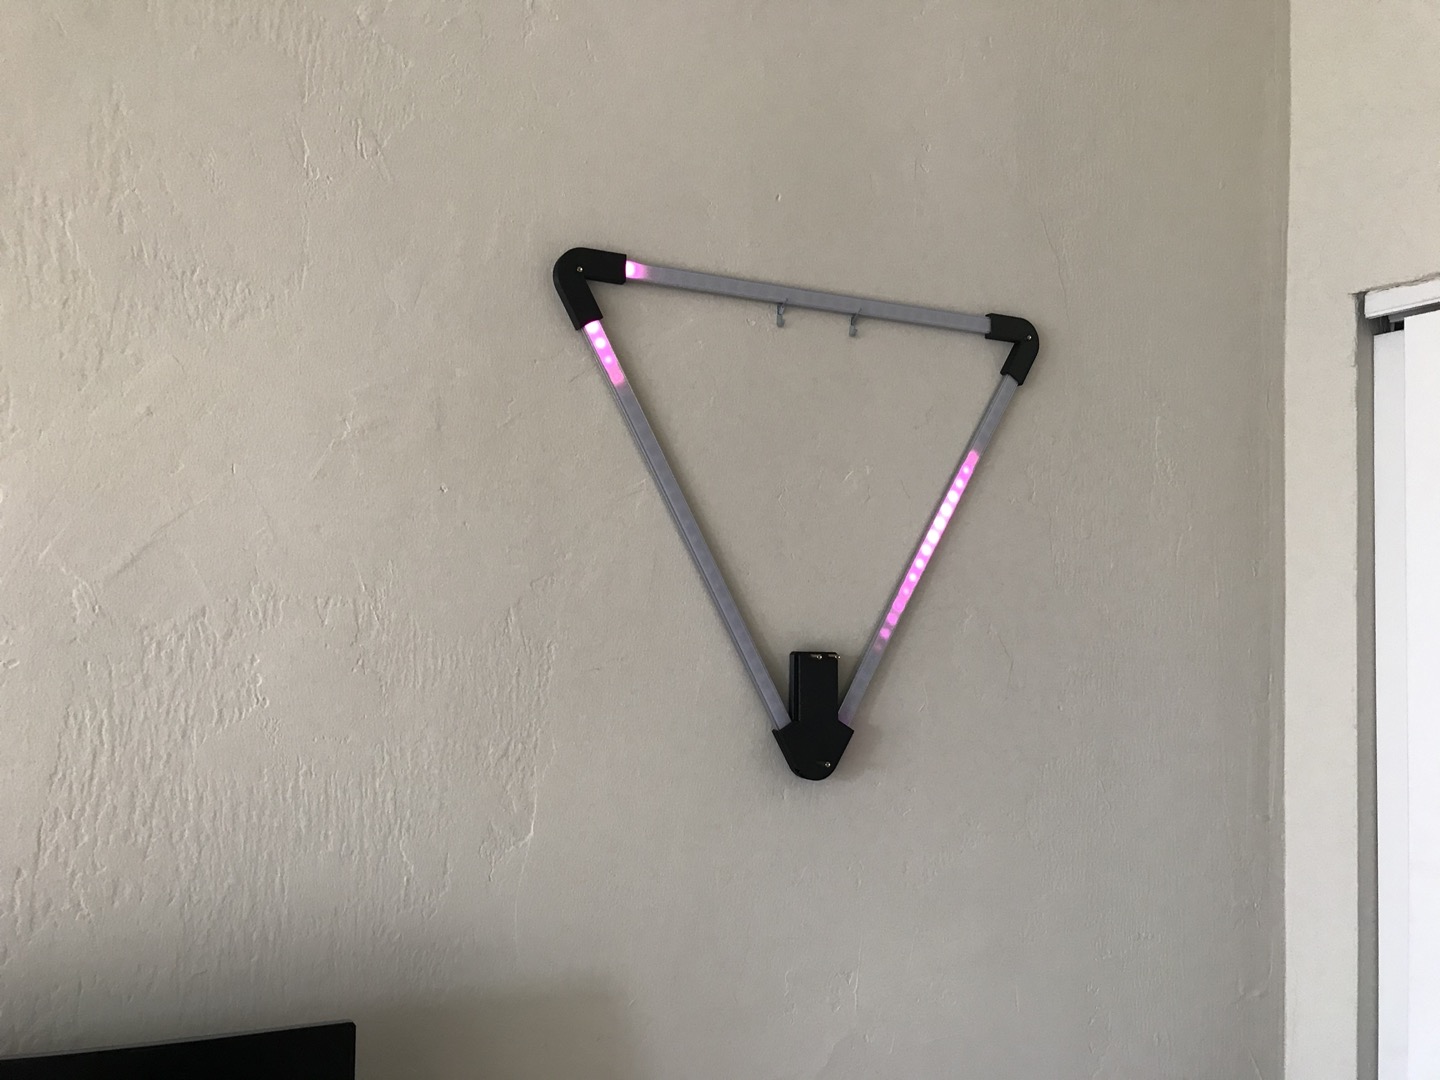 Finished device mounted on my wall.